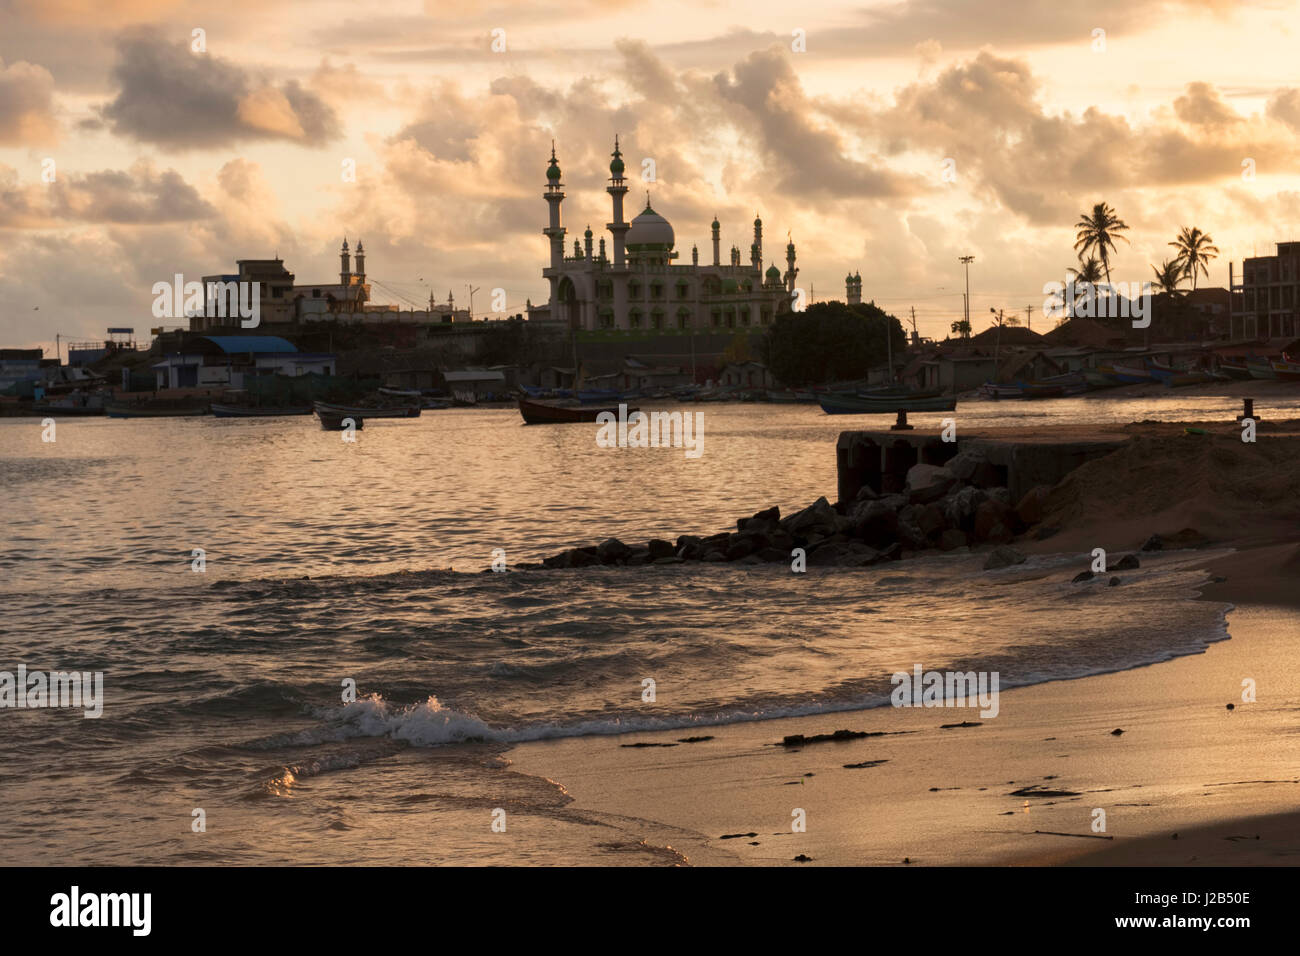 Beach of Vizhinjam town with one of the mosques in the background Stock Photo